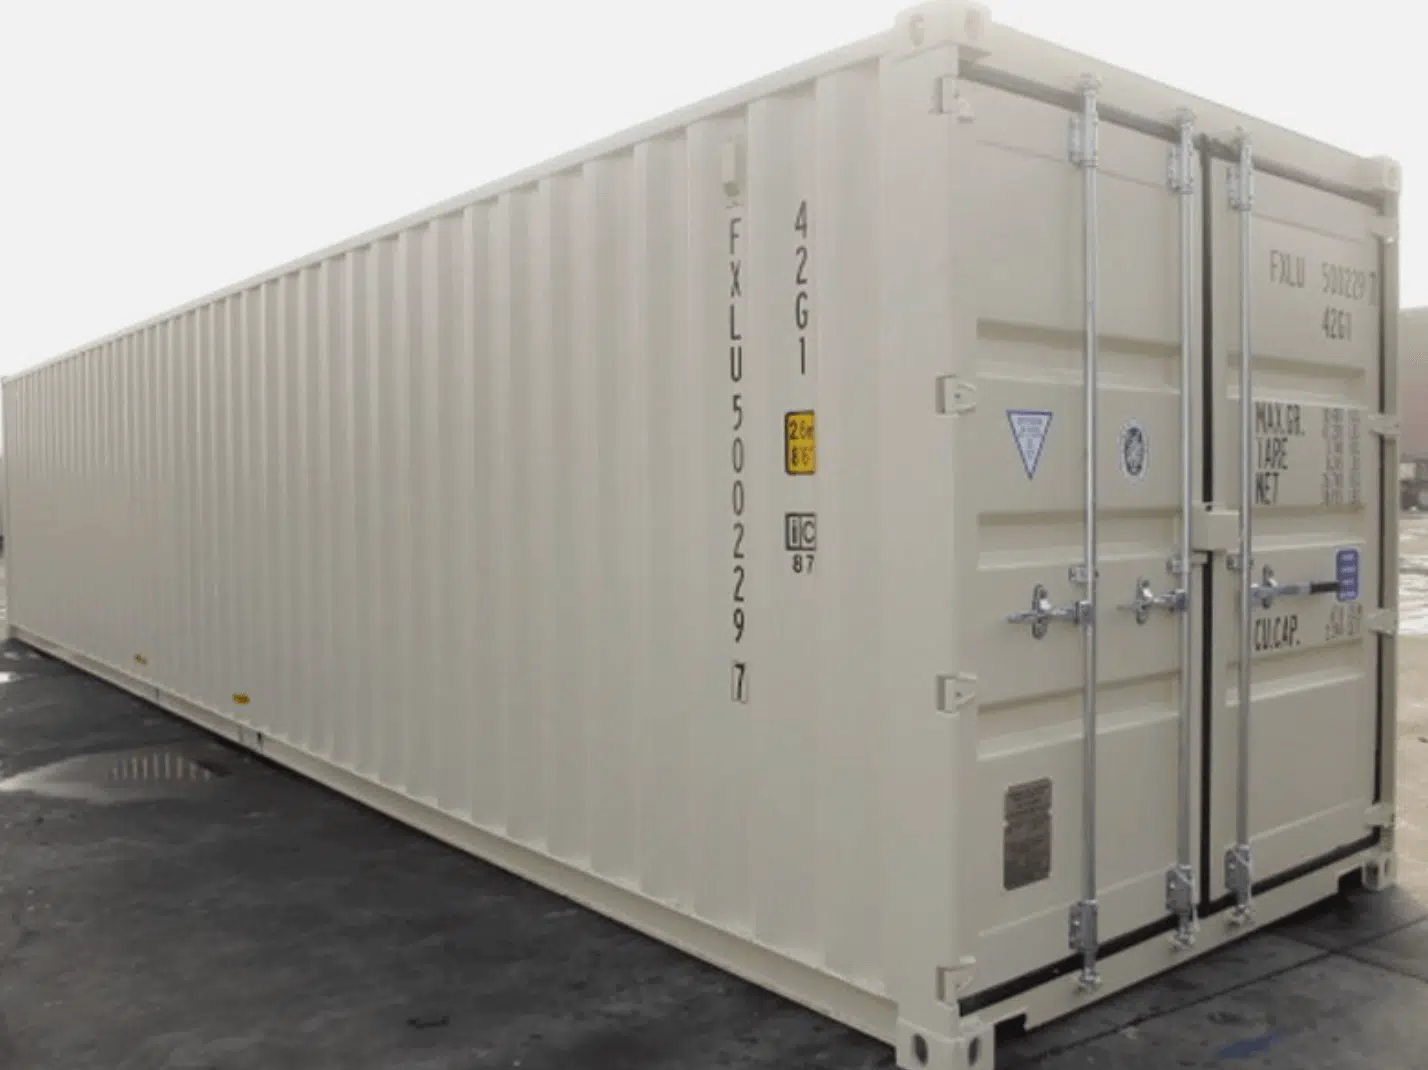 An example of a white 40 foot shipping container for someone who is looking to buy a small shipping container